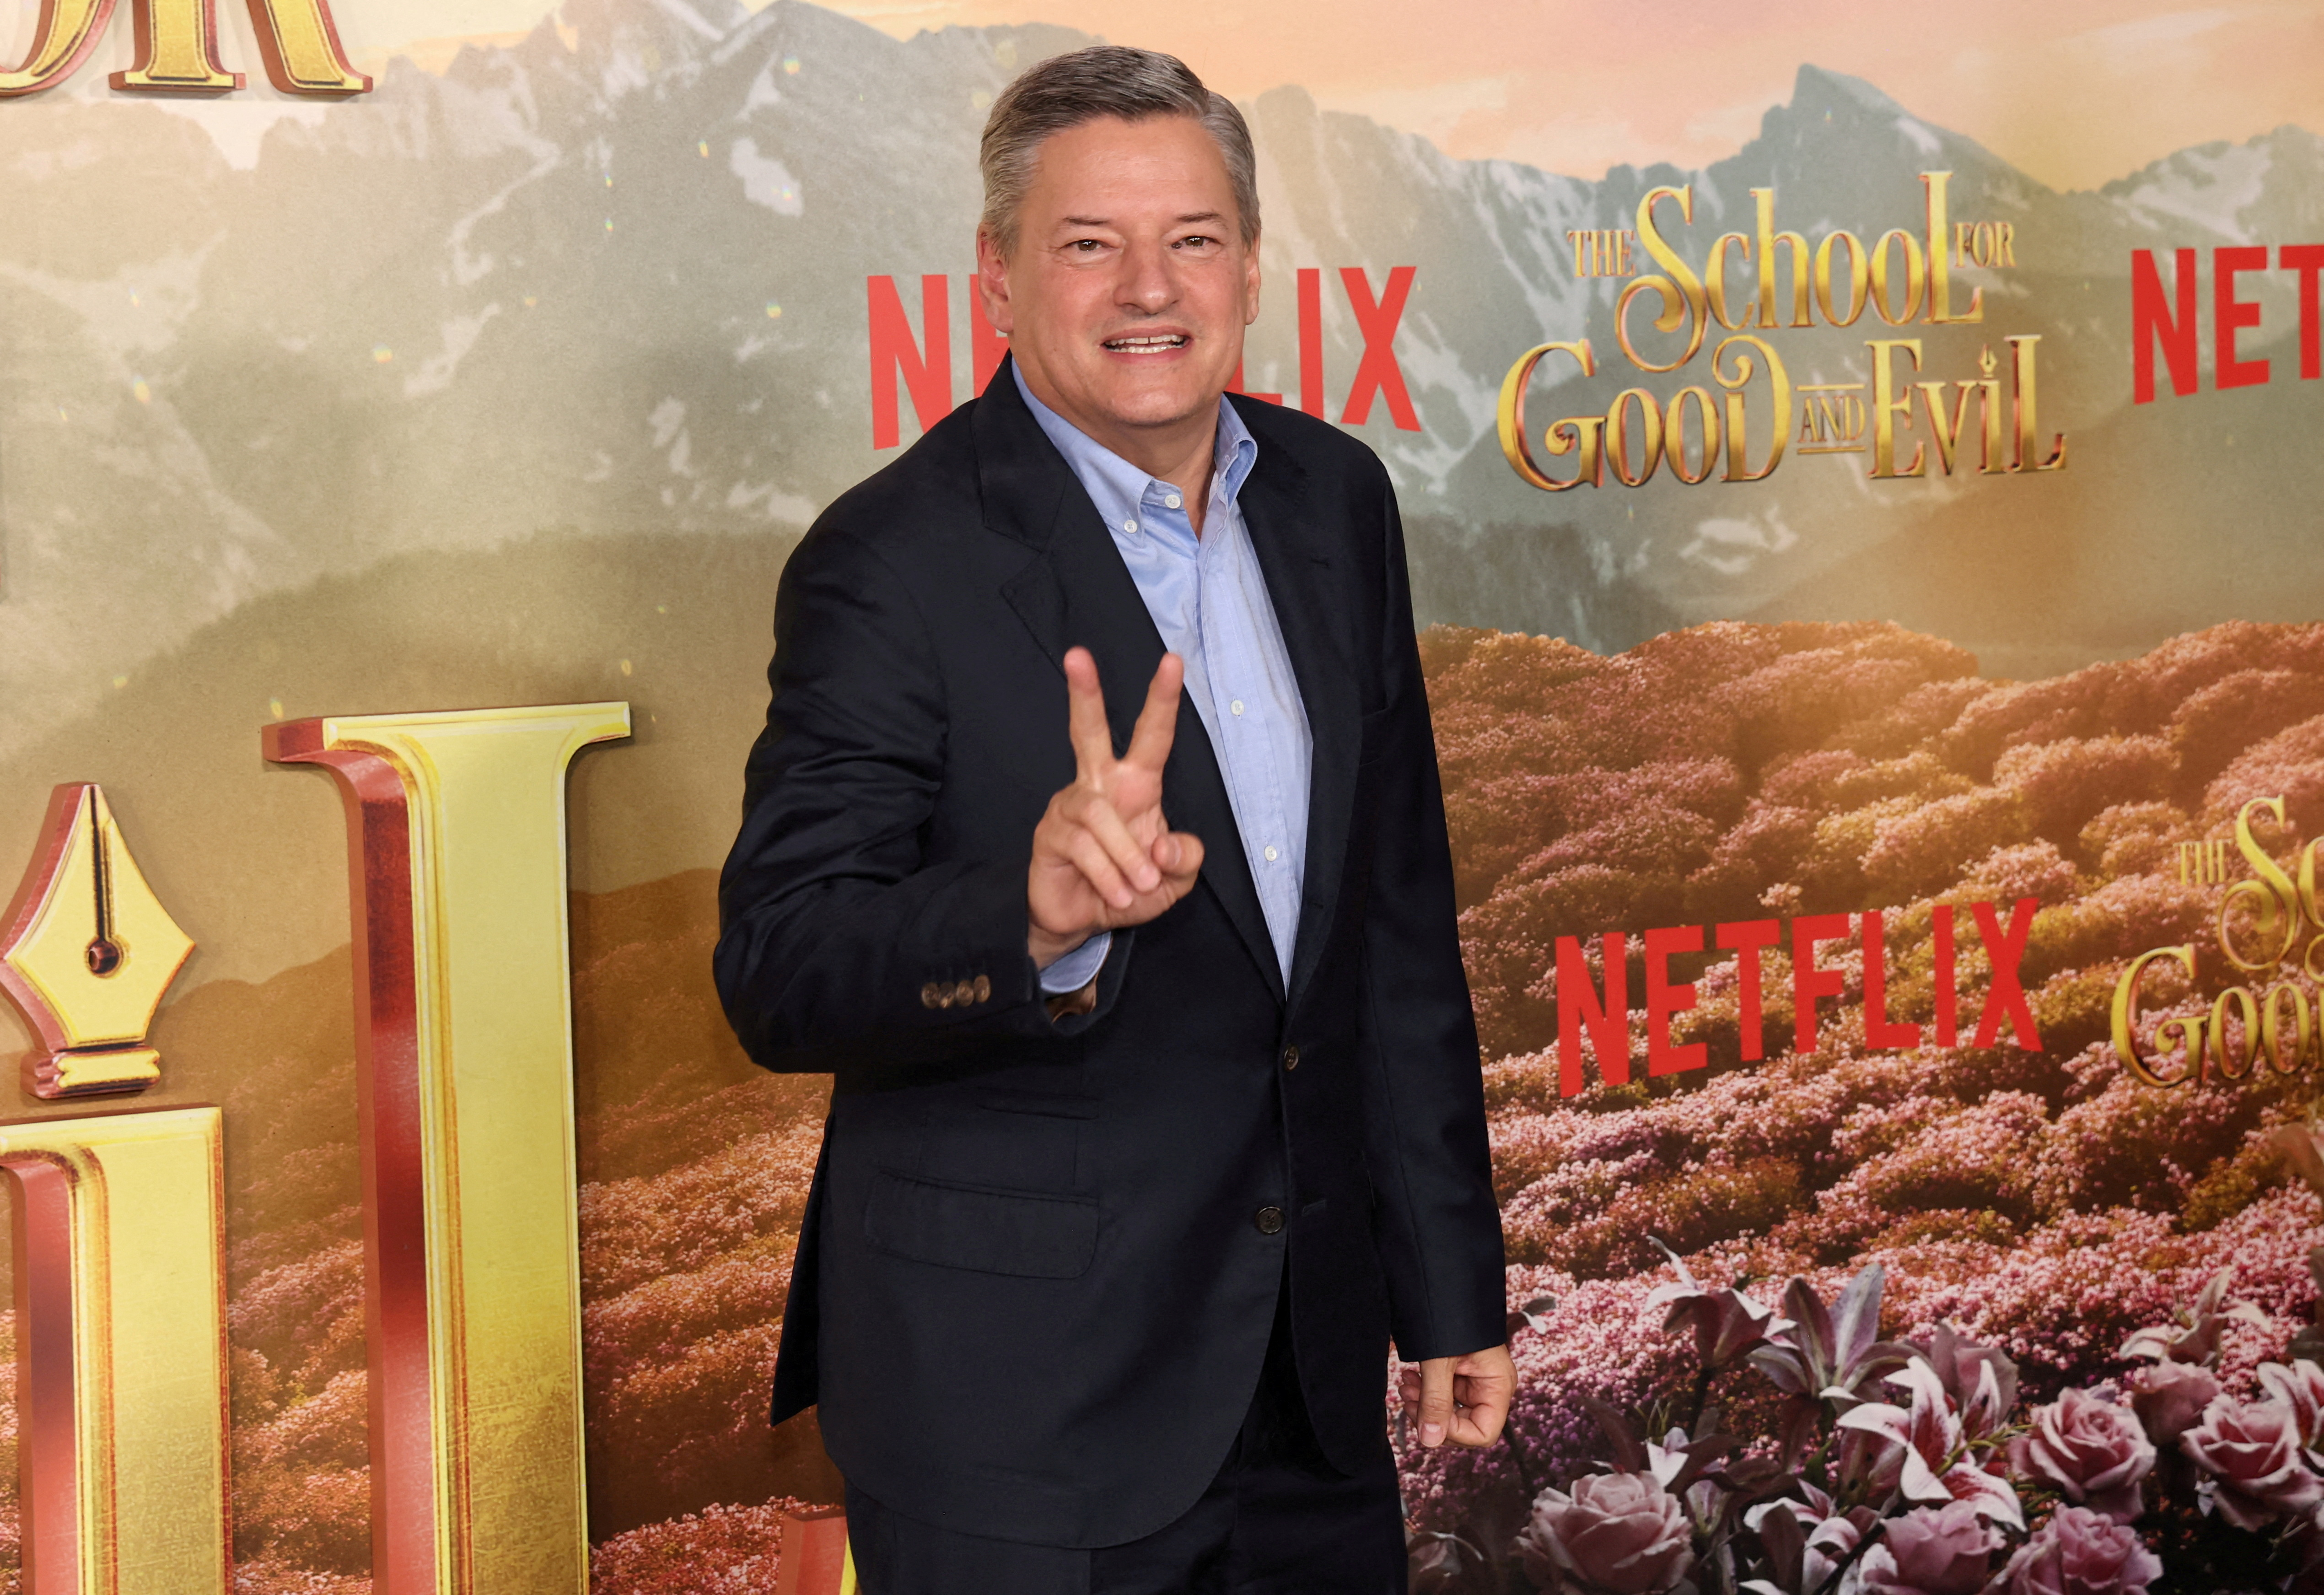 Ted Sarandos, Chief Content Officer and Co-Chief Executive Officer of Netflix, attends a film premiere in Los Angeles, California